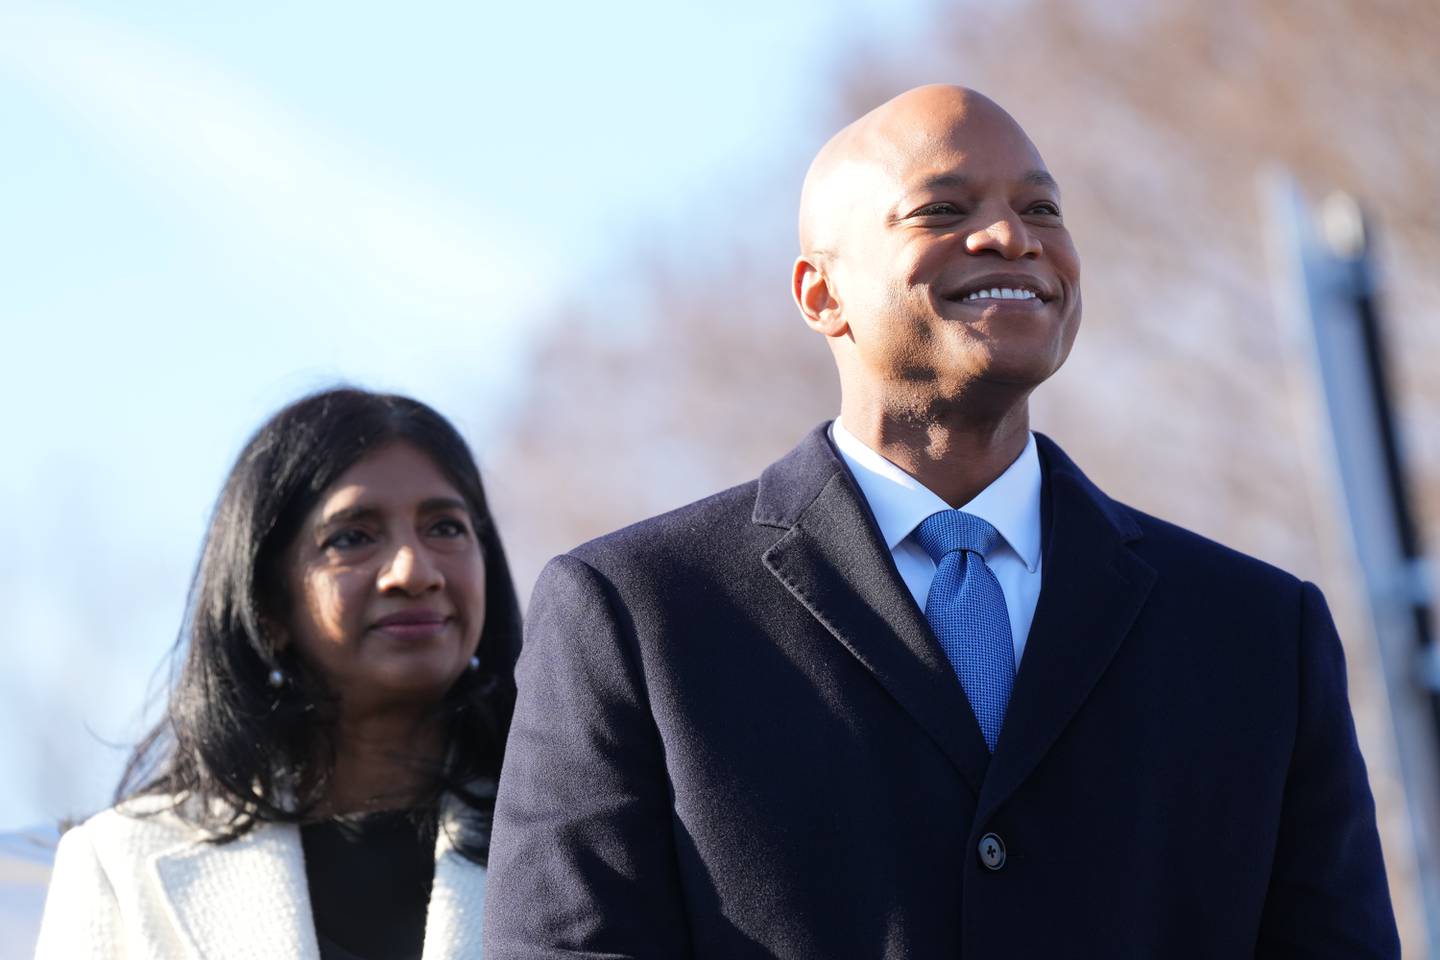 Wes Moore and Aruna Miller arrive at the Kunta Kinte-Alex Haley Memorial to lay a wreath and say a prayer before the governor-elect is sworn in as the first African American governor of the state of Maryland.